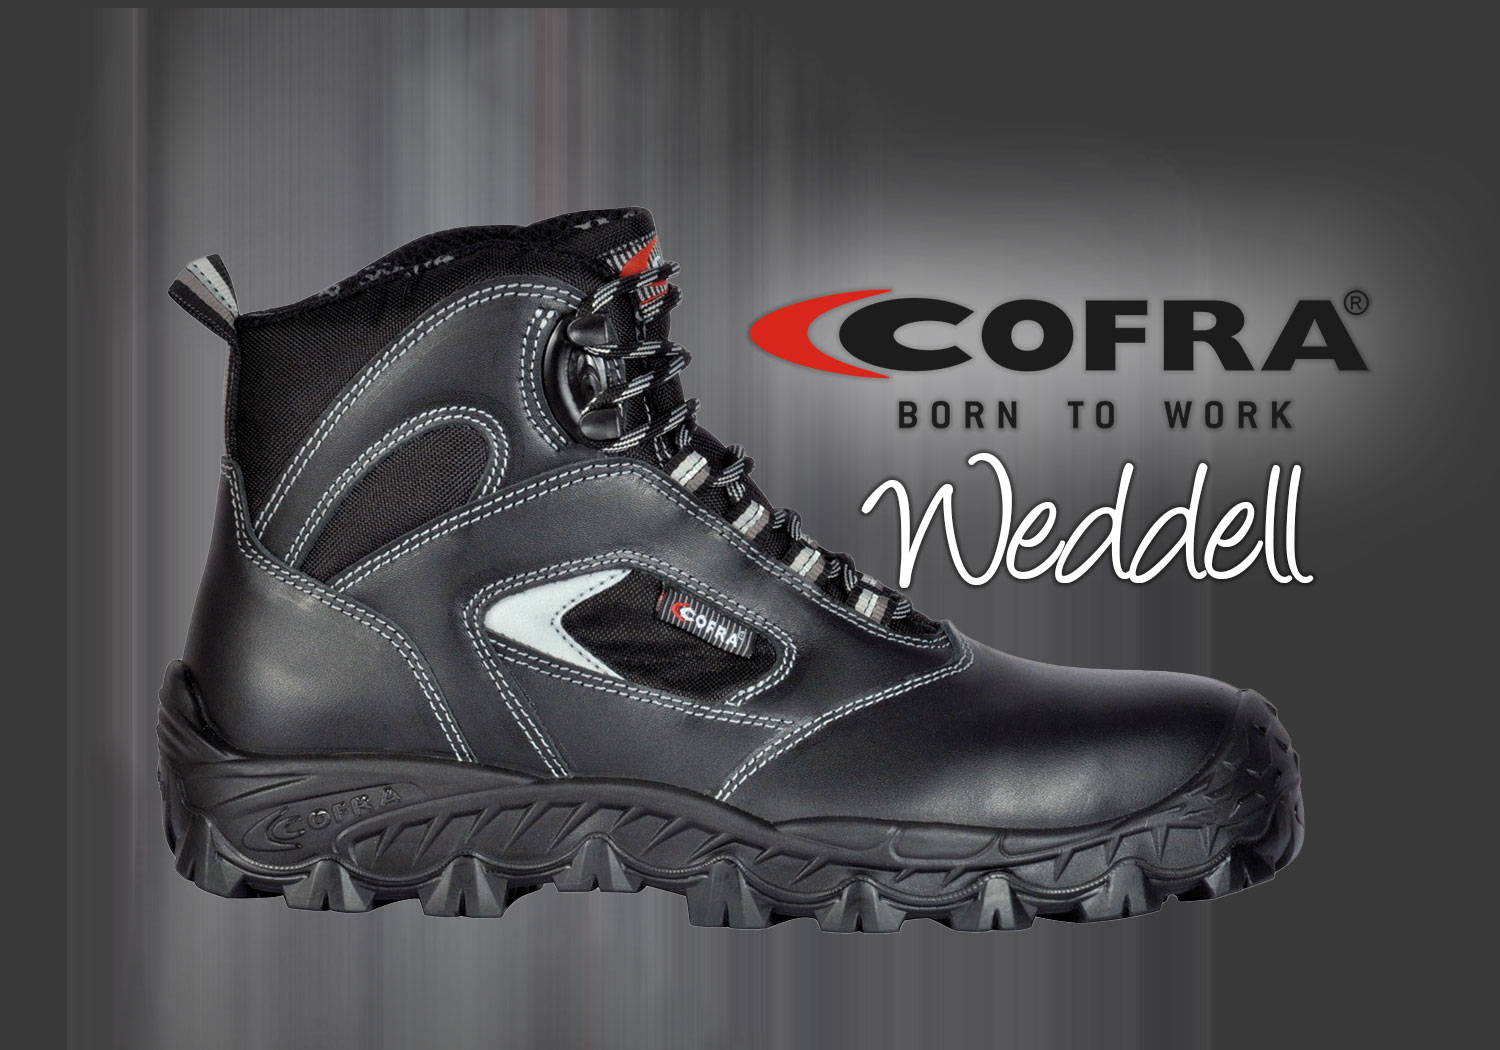 Kick Off Winter with the Cofra Weddell